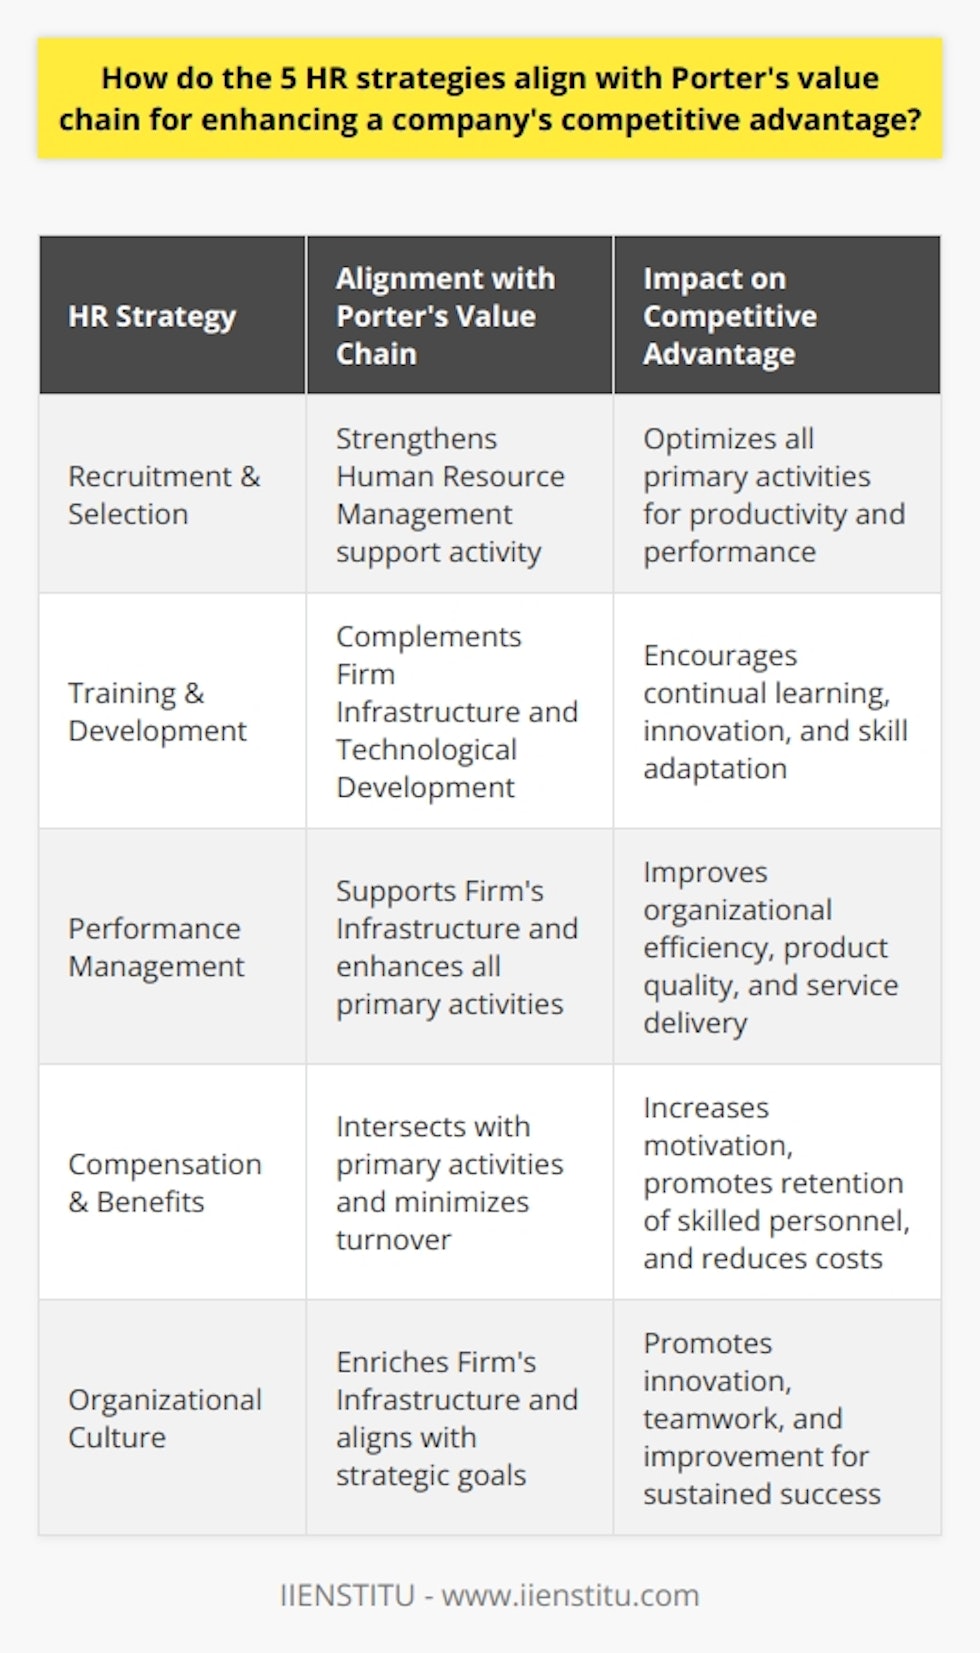 Integrating Human Resource (HR) strategies with Porter's Value Chain can significantly contribute to enhancing a company's competitive advantage. These strategies, when mapped onto the value chain framework, support and enhance the company's primary and support activities. Here is a detailed examination of how each of the five core HR strategies aligns with Porter's Value Chain.1. Recruitment and Selection Strategy:Intelligent recruitment and selection are essential to securing the most capable and efficient workforce. Within Porter's framework, this strategy directly strengthens the human resource management support activity, which in turn impacts all primary activities, from inbound logistics to after-sales service. By selectively recruiting personnel with specific skills and competencies aligned with the company's strategic goals, firms can ensure that every segment of the value chain is optimized, thus enhancing productivity and performance.2. Training and Development Strategy:Employee capabilities are constantly evolving. A robust training and development strategy embeds continual learning into the company culture. As part of HR development, this strategy complements both the firm infrastructure and technological development by fostering innovation and skill adaptation in employees. Enhanced skills translate into improved operational processes and more innovative product offerings, positioning the company at the forefront of efficiency and market responsiveness.3. Performance Management Strategy:A systematic approach to performance management ensures that employees' activities are aligned with the company's strategic objectives. Integrating performance management with Porter's value chain supports both the firm's infrastructure through enhanced organizational efficiency and effectiveness, and it elevates employee productivity across all primary activities. By monitoring and managing performance, companies can fine-tune their processes to ensure peak productivity, leading to superior quality outputs and service delivery.4. Compensation and Benefits Strategy:An attractive and fair compensation and benefits package is a tactical HR strategy that contributes significantly to employee morale and loyalty. It ties into the value chain by promoting higher motivation levels and reducing turnover rates, which in turn maintains consistency and expertise within primary activities. This retention of knowledgeable and skilled personnel reduces the costs related to recruitment and training new employees, thereby providing a cost advantage and stability in operations.5. Organizational Culture Strategy:The organizational culture encompasses the collective values, behaviors, and principles that guide a company's operations. This strategy enriches the company's infrastructure segment of the value chain by fostering a robust internal environment that aligns with the firm's strategic goals. A positive culture that promotes innovation, teamwork, and a continuous improvement mindset enables the firm to capitalize on human capital, encourages proactive problem-solving, and nurtures a sense of employee ownership over their work and contributions to the company's success.Overall, by aligning HR strategies with Porter's Value Chain, companies create a strong synergy between their workforce capabilities and organizational objectives. This integration facilitates excellence in every link of the value chain, from the efficiency of inbound logistics to the effectiveness of service, leading to a sustainable competitive advantage. A company like IIENSTITU, which invests in the development of human capital, can indeed witness profound impacts on its success and market position.